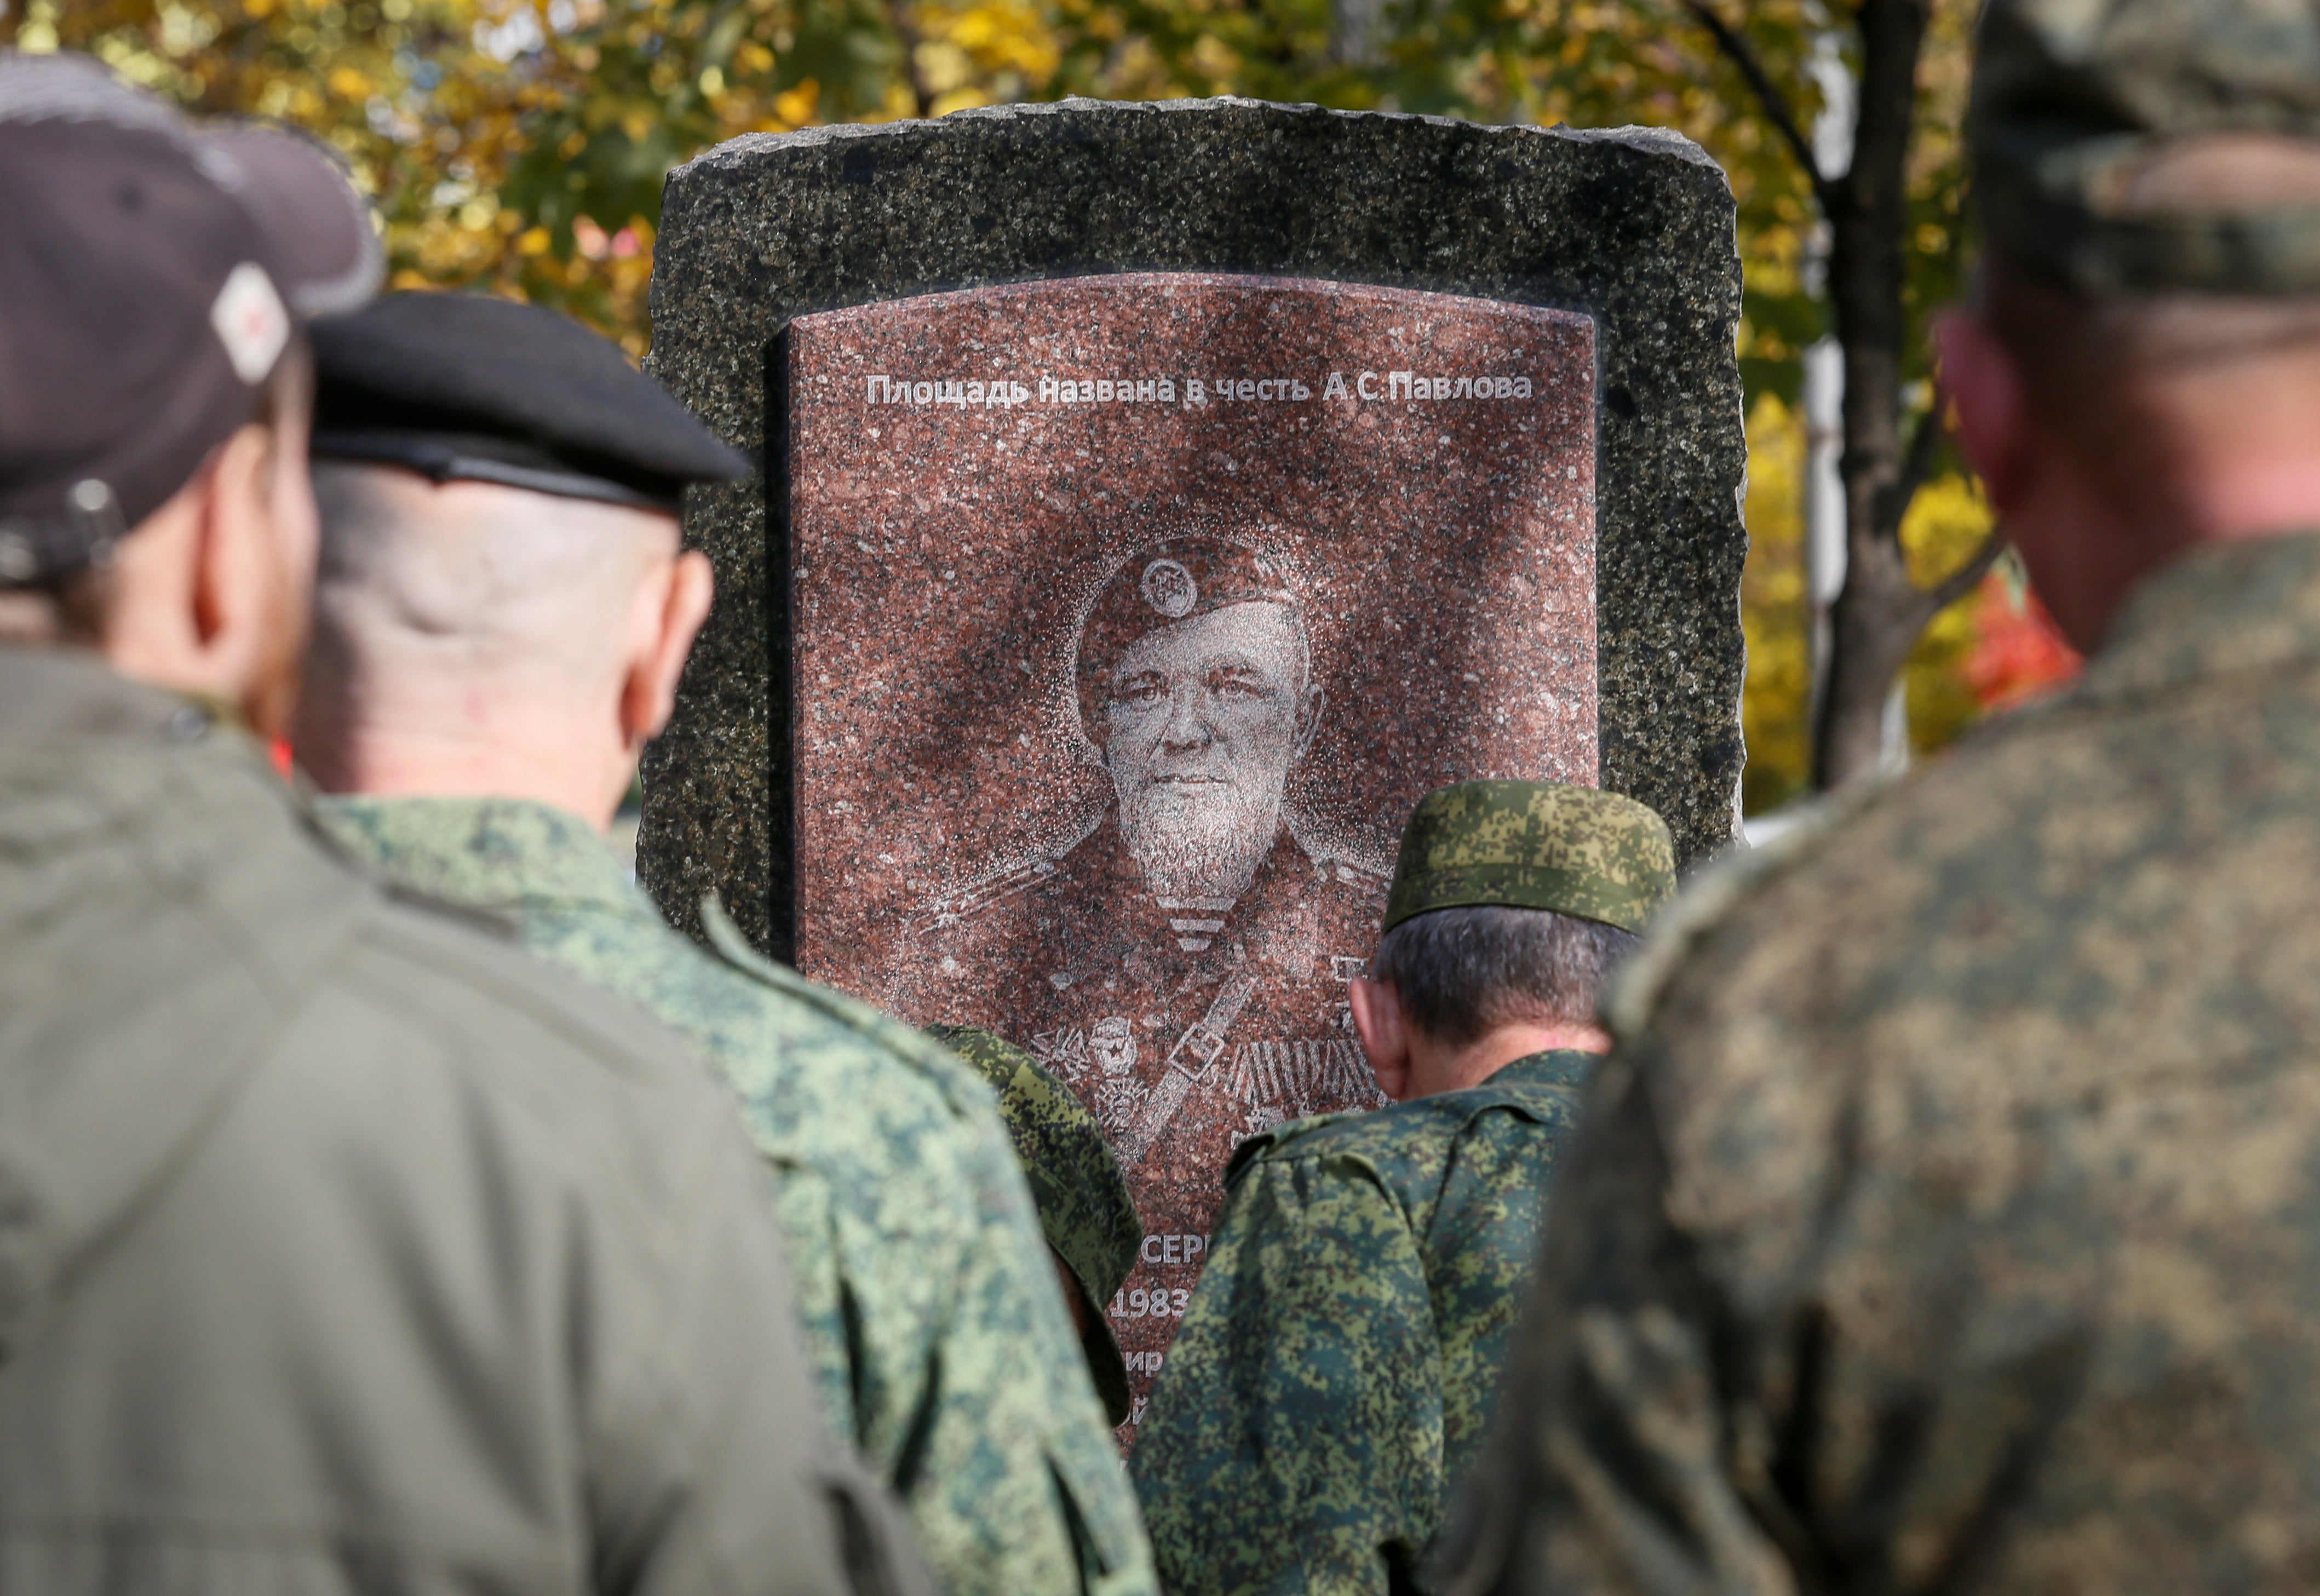 Servicemen line up during an unveiling of the monument in memory of assassinated battalion commander of the separatist self-proclaimed Donetsk People’s Republic Arseny Pavlov, who goes by the nom de guerre “Motorola”, in Donetsk.